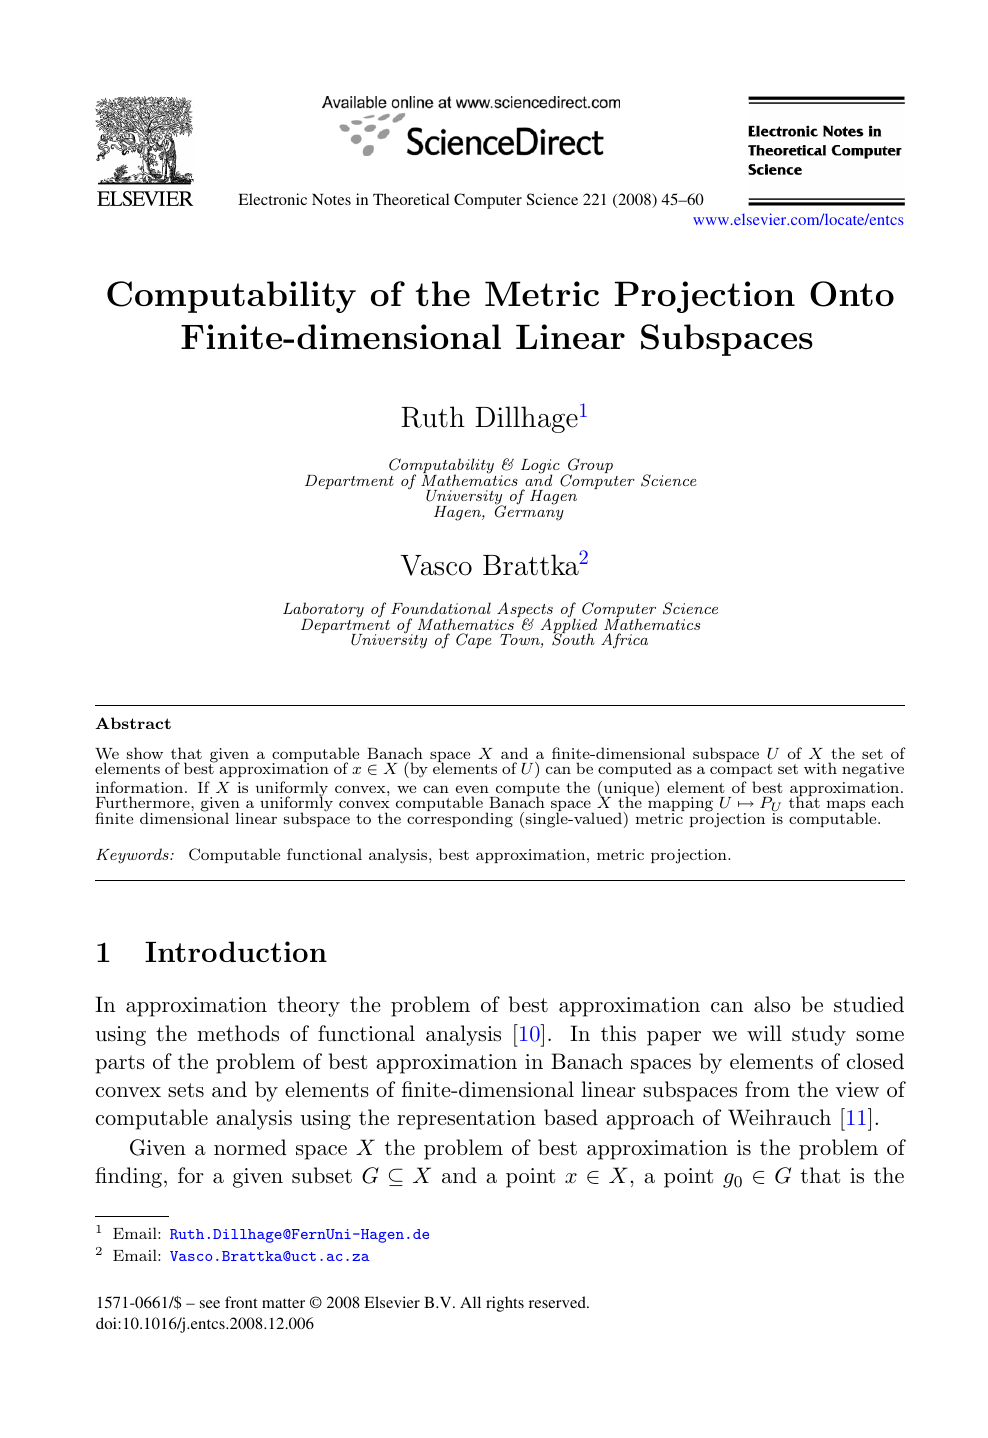 Computability Of The Metric Projection Onto Finite Dimensional Linear Subspaces Topic Of Research Paper In Mathematics Download Scholarly Article Pdf And Read For Free On Cyberleninka Open Science Hub